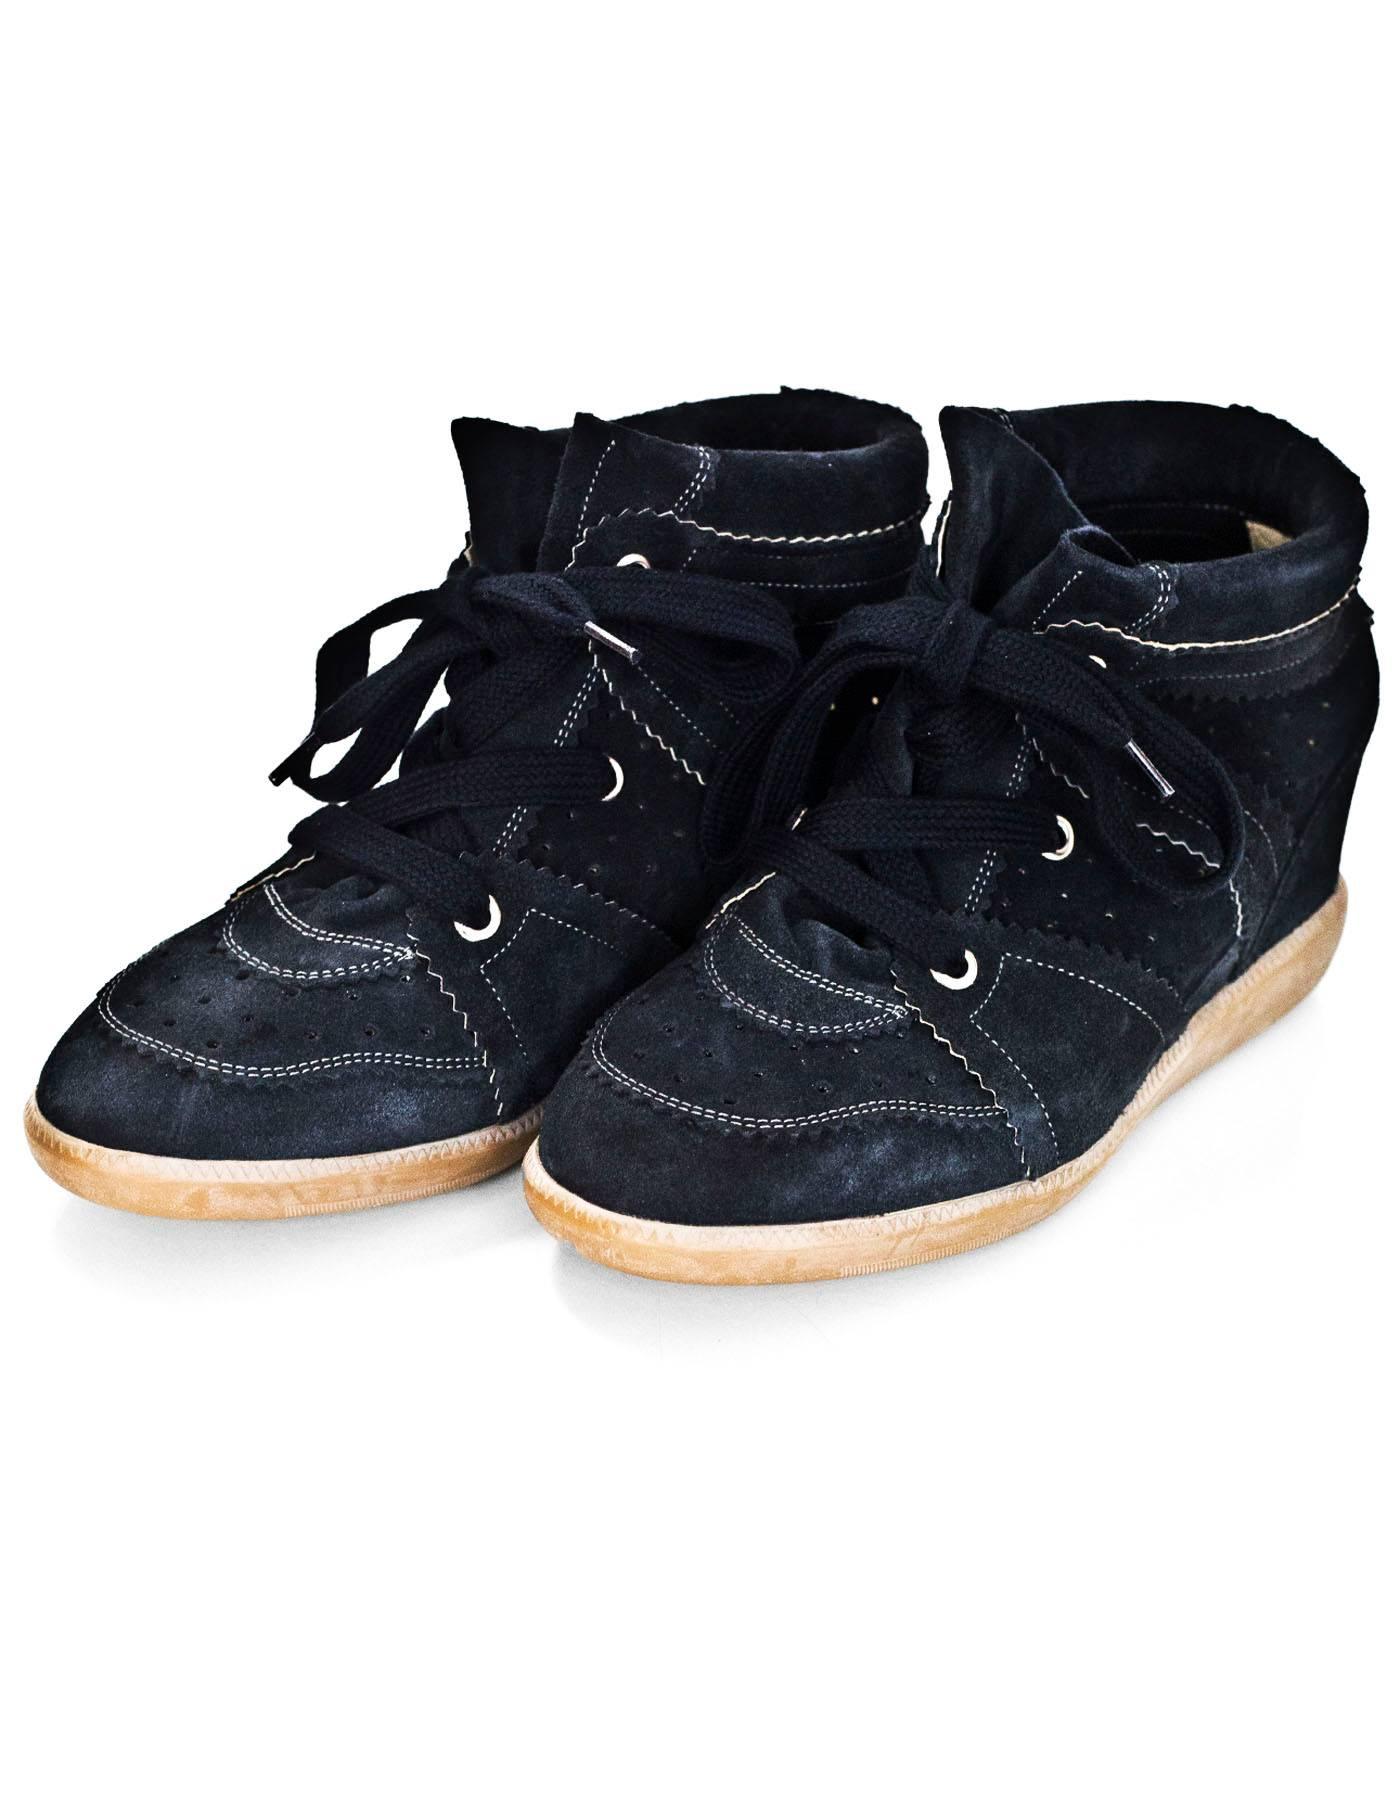 Isabel Marant Black Bobby Suede Wedge Sneakers Sz 41

Color: Black
Materials: Suede
Closure/Opening: Lace tie closure
Sole Stamp: Isabel Marant 41
Retail Price: $600 + tax
Overall Condition: Excellent pre-owned condition with the exception of some